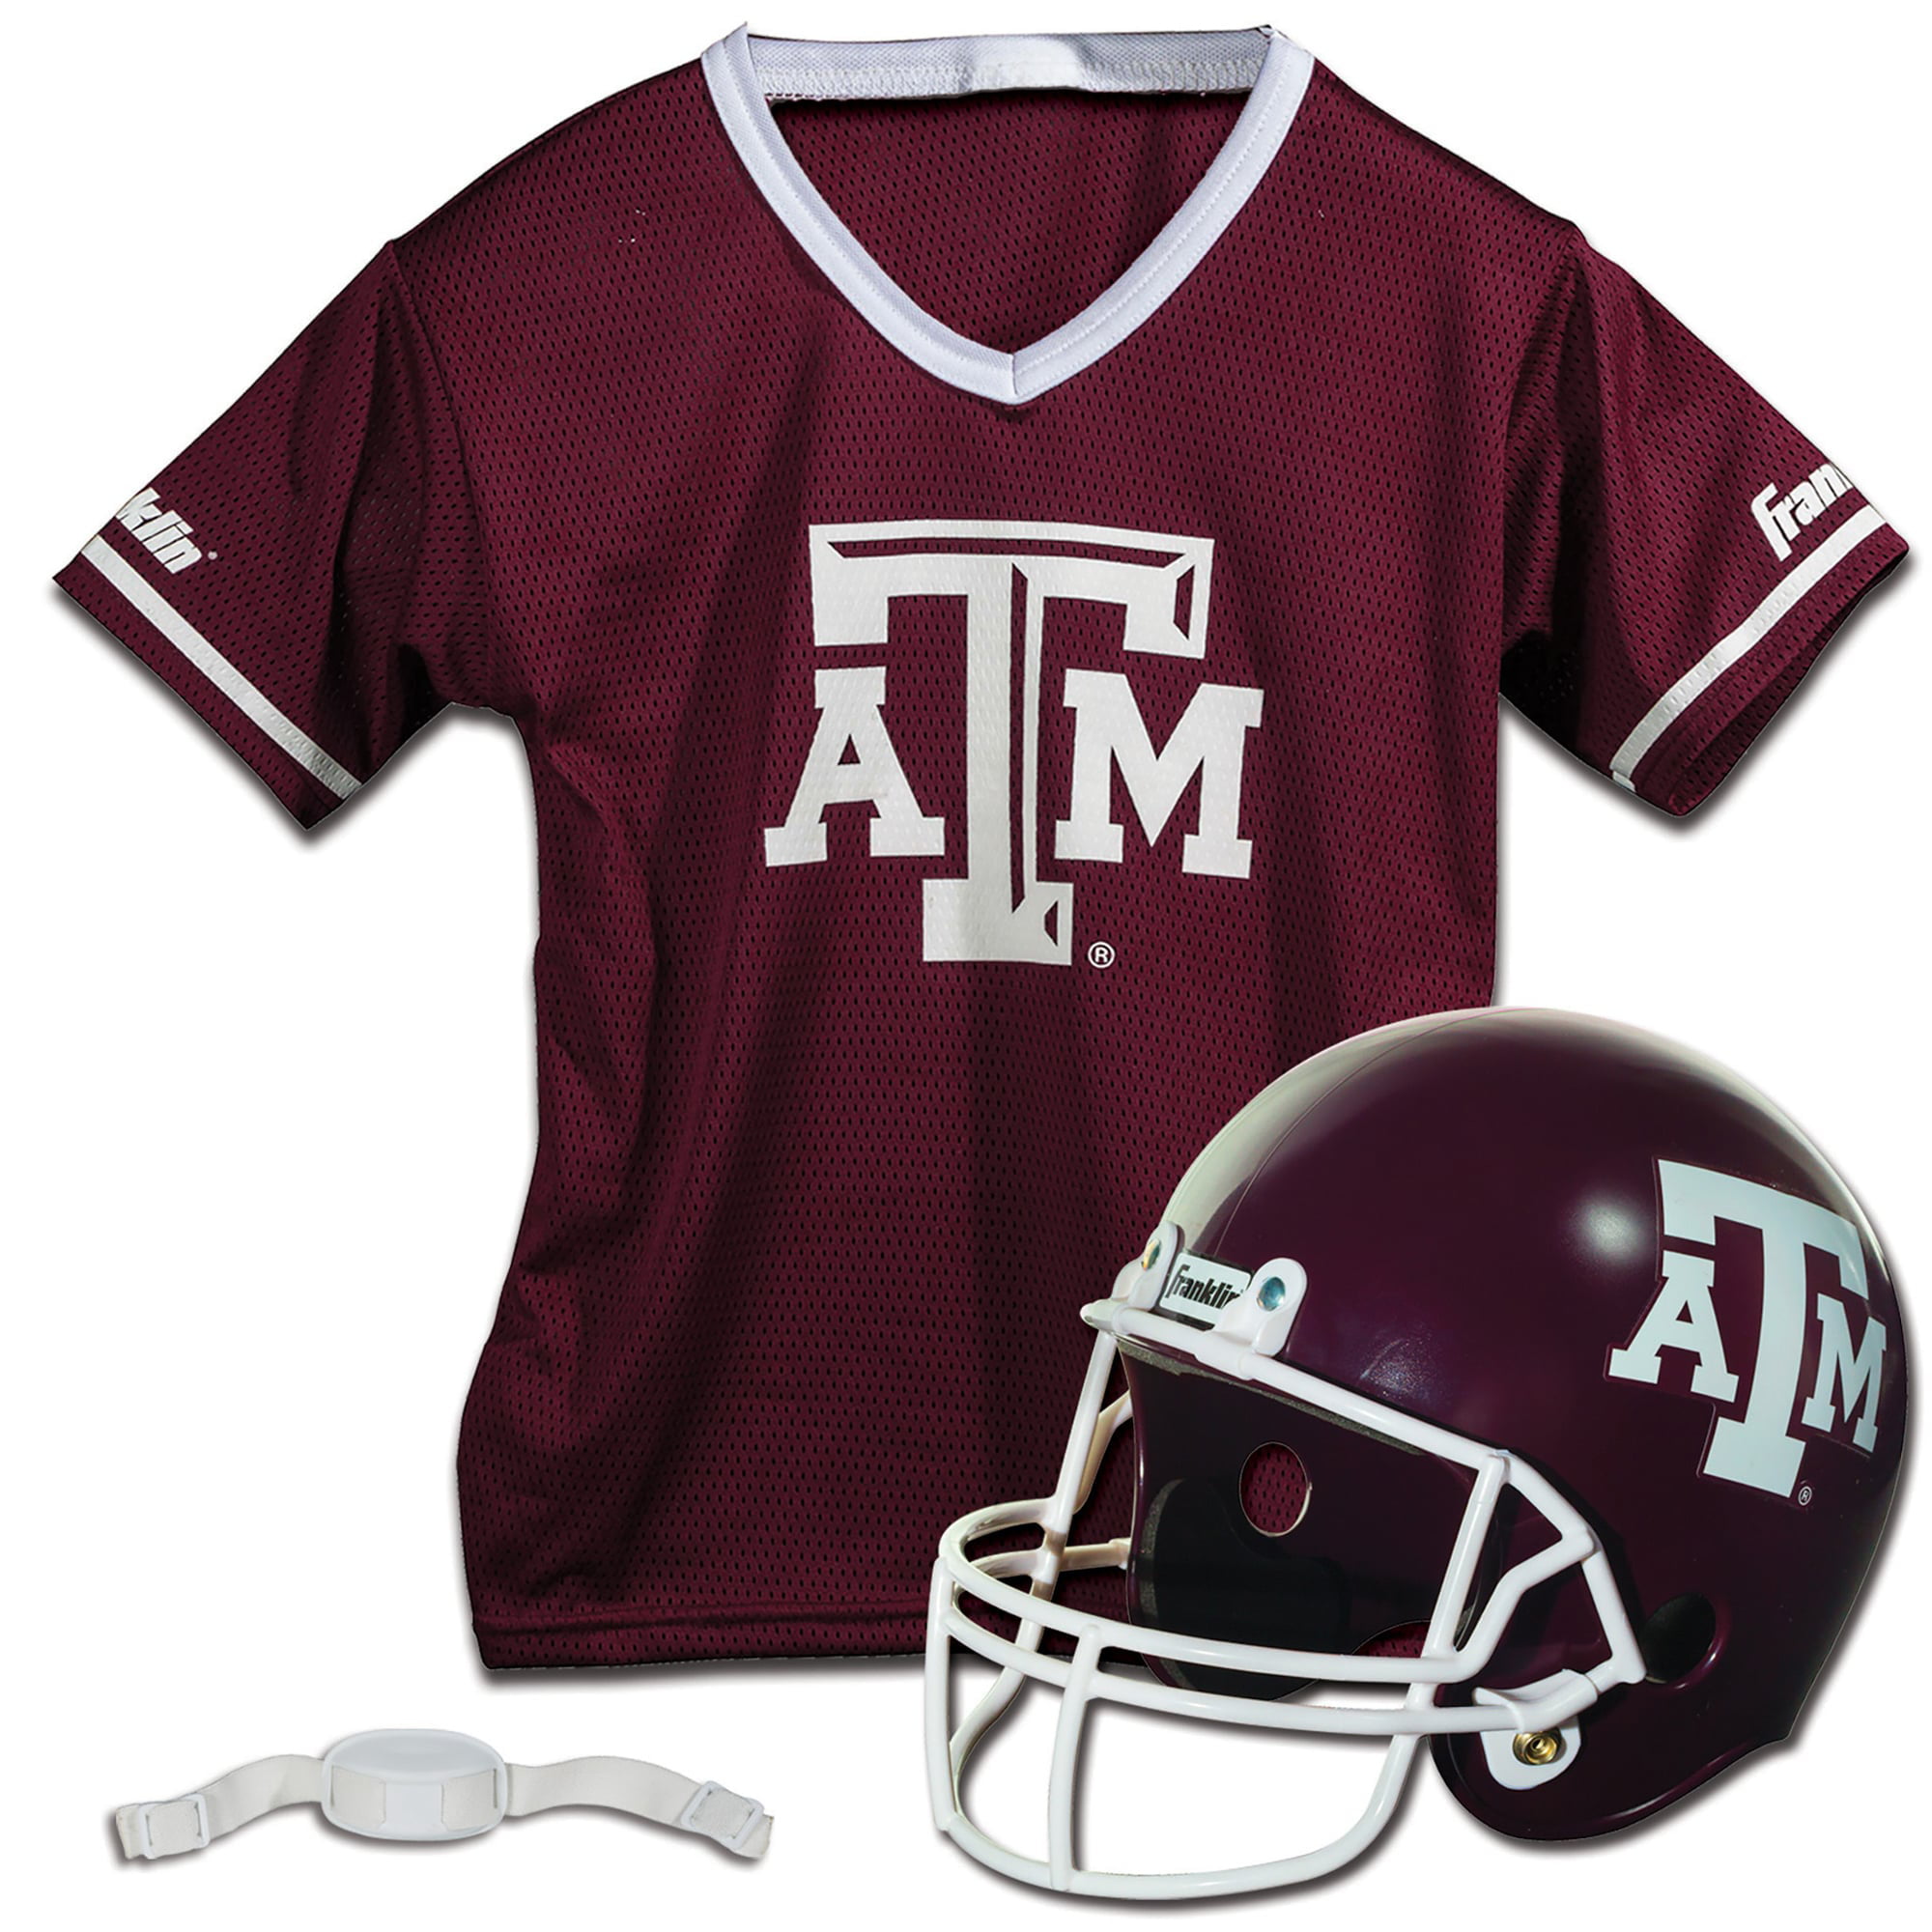 youth texas a&m football jersey